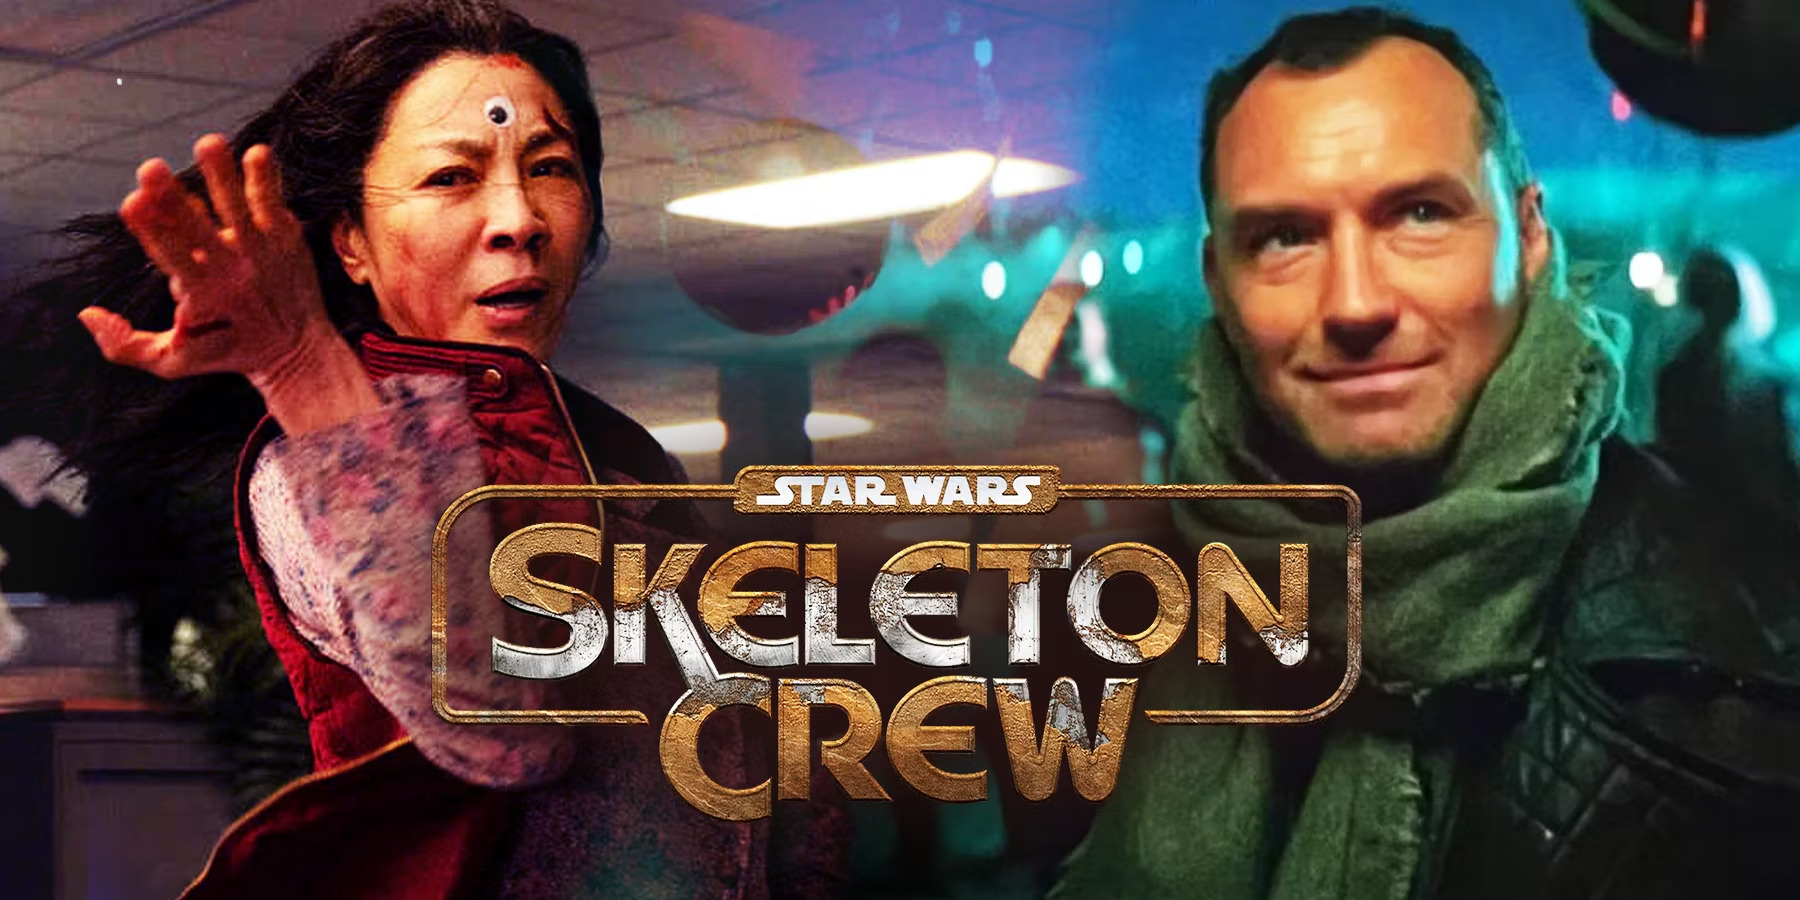 Star Wars - I registi di Everything Everywhere All at Once sulla serie Skeleton Crew